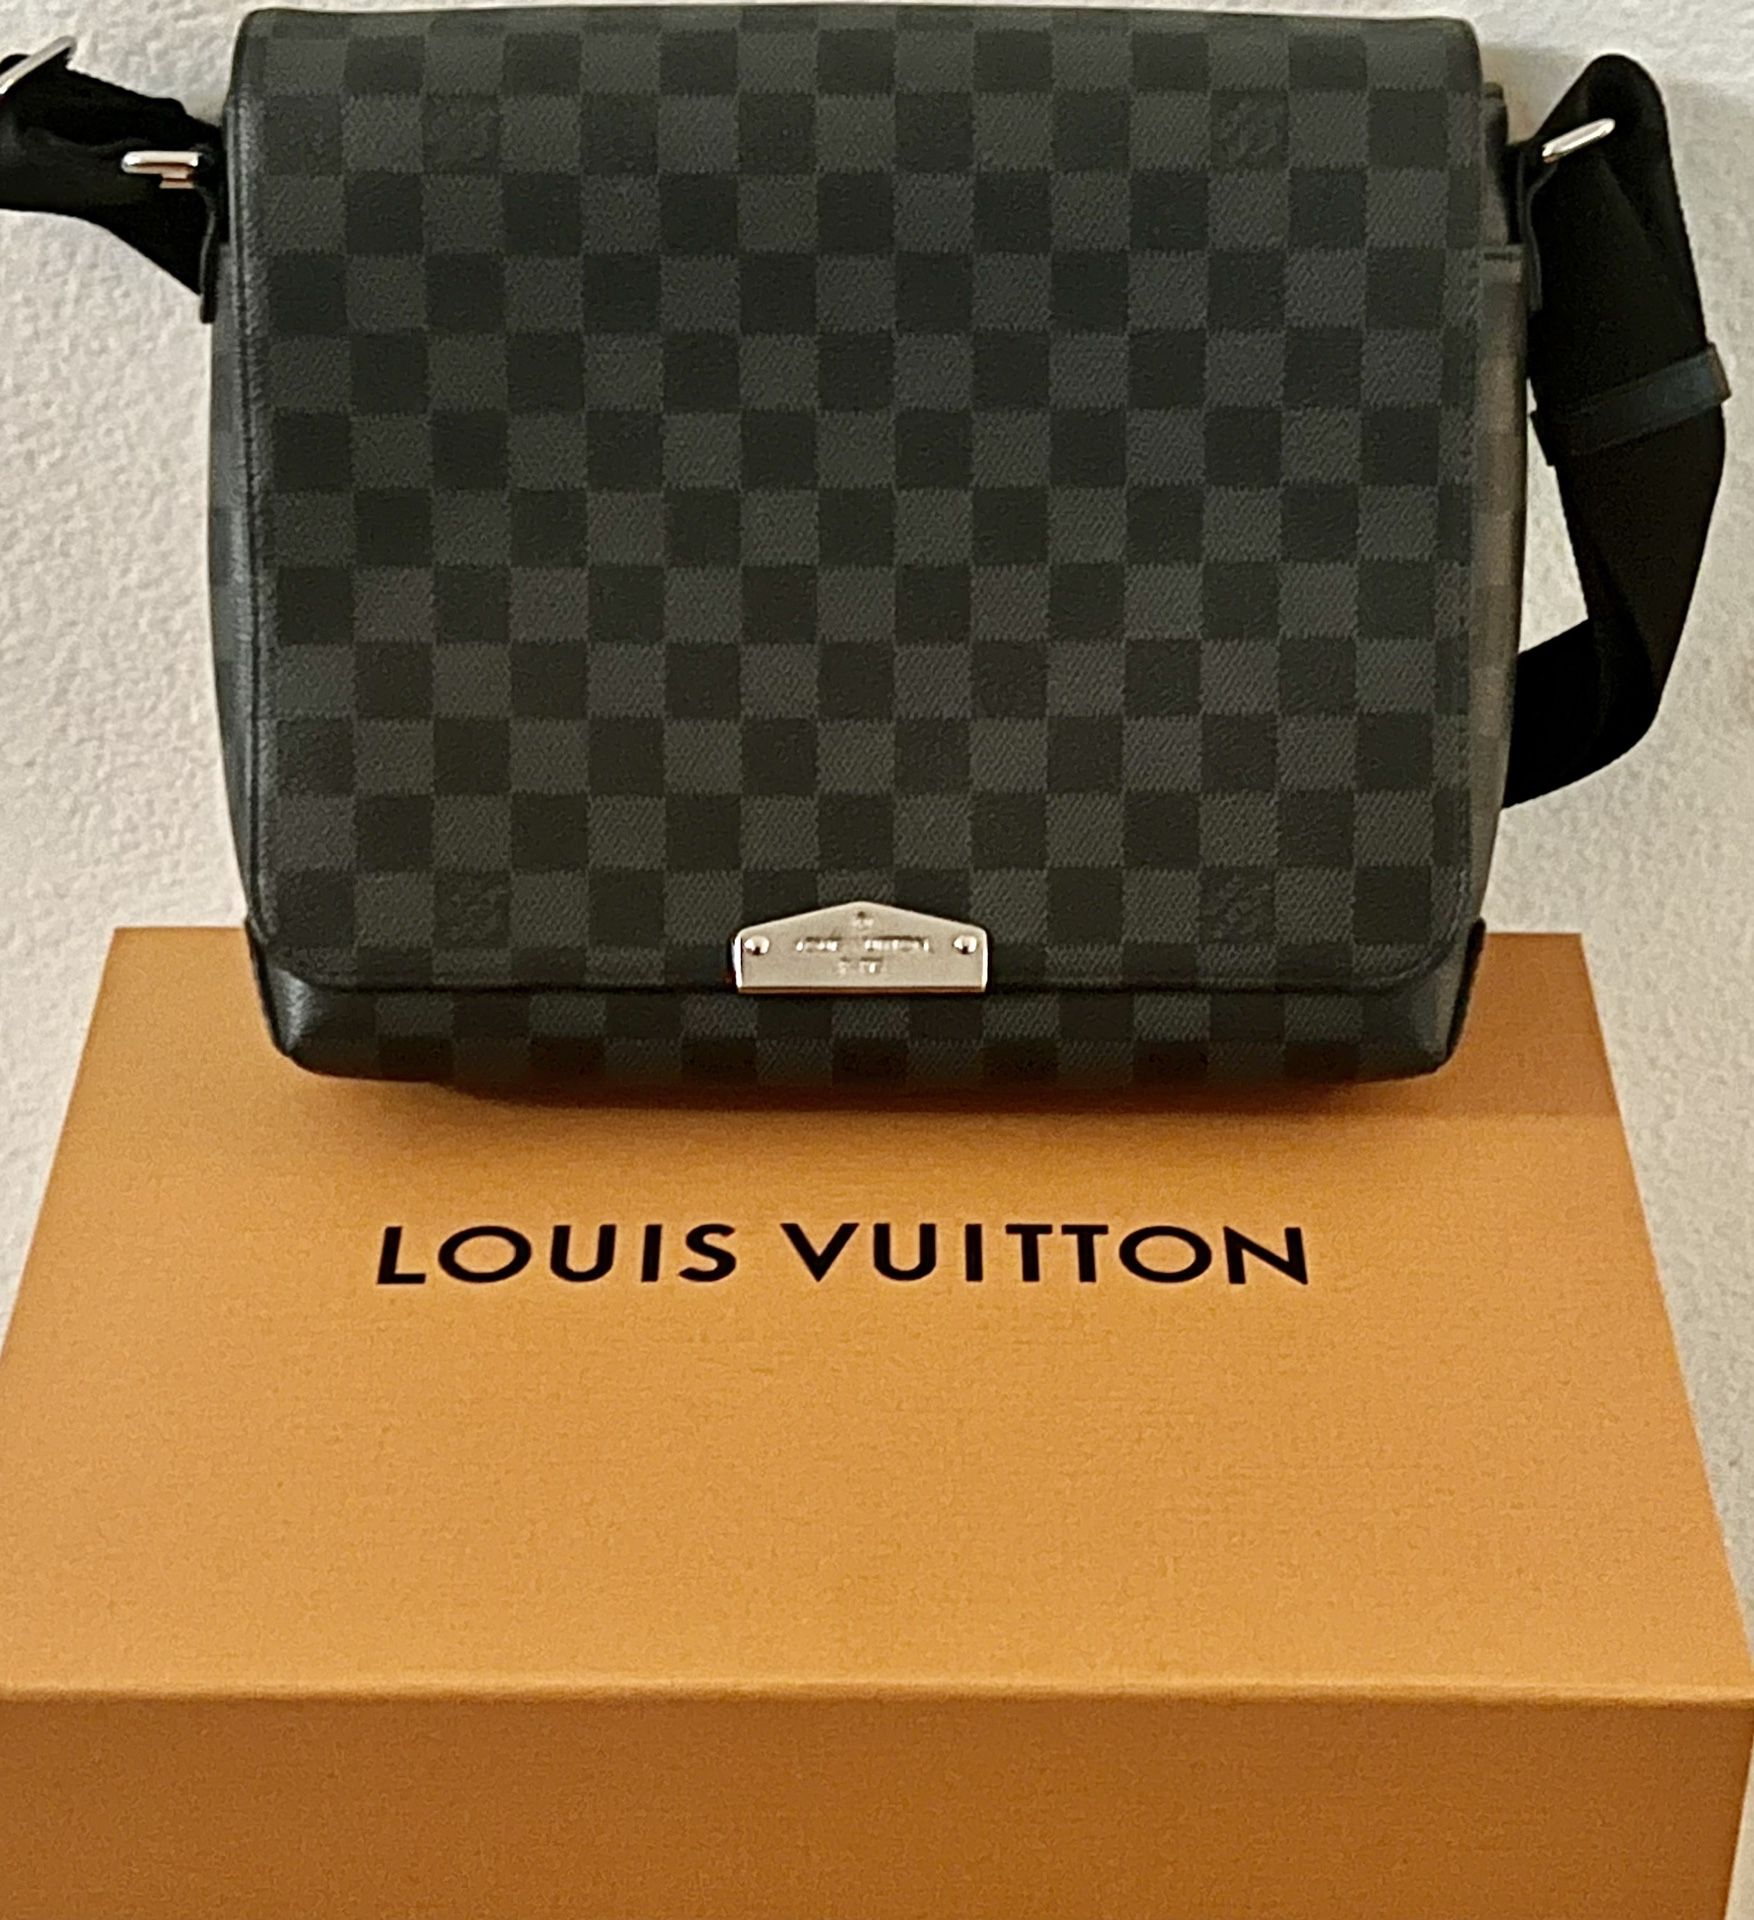 Louis Vuitton District PM Messenger for Sale in Seattle, WA - OfferUp